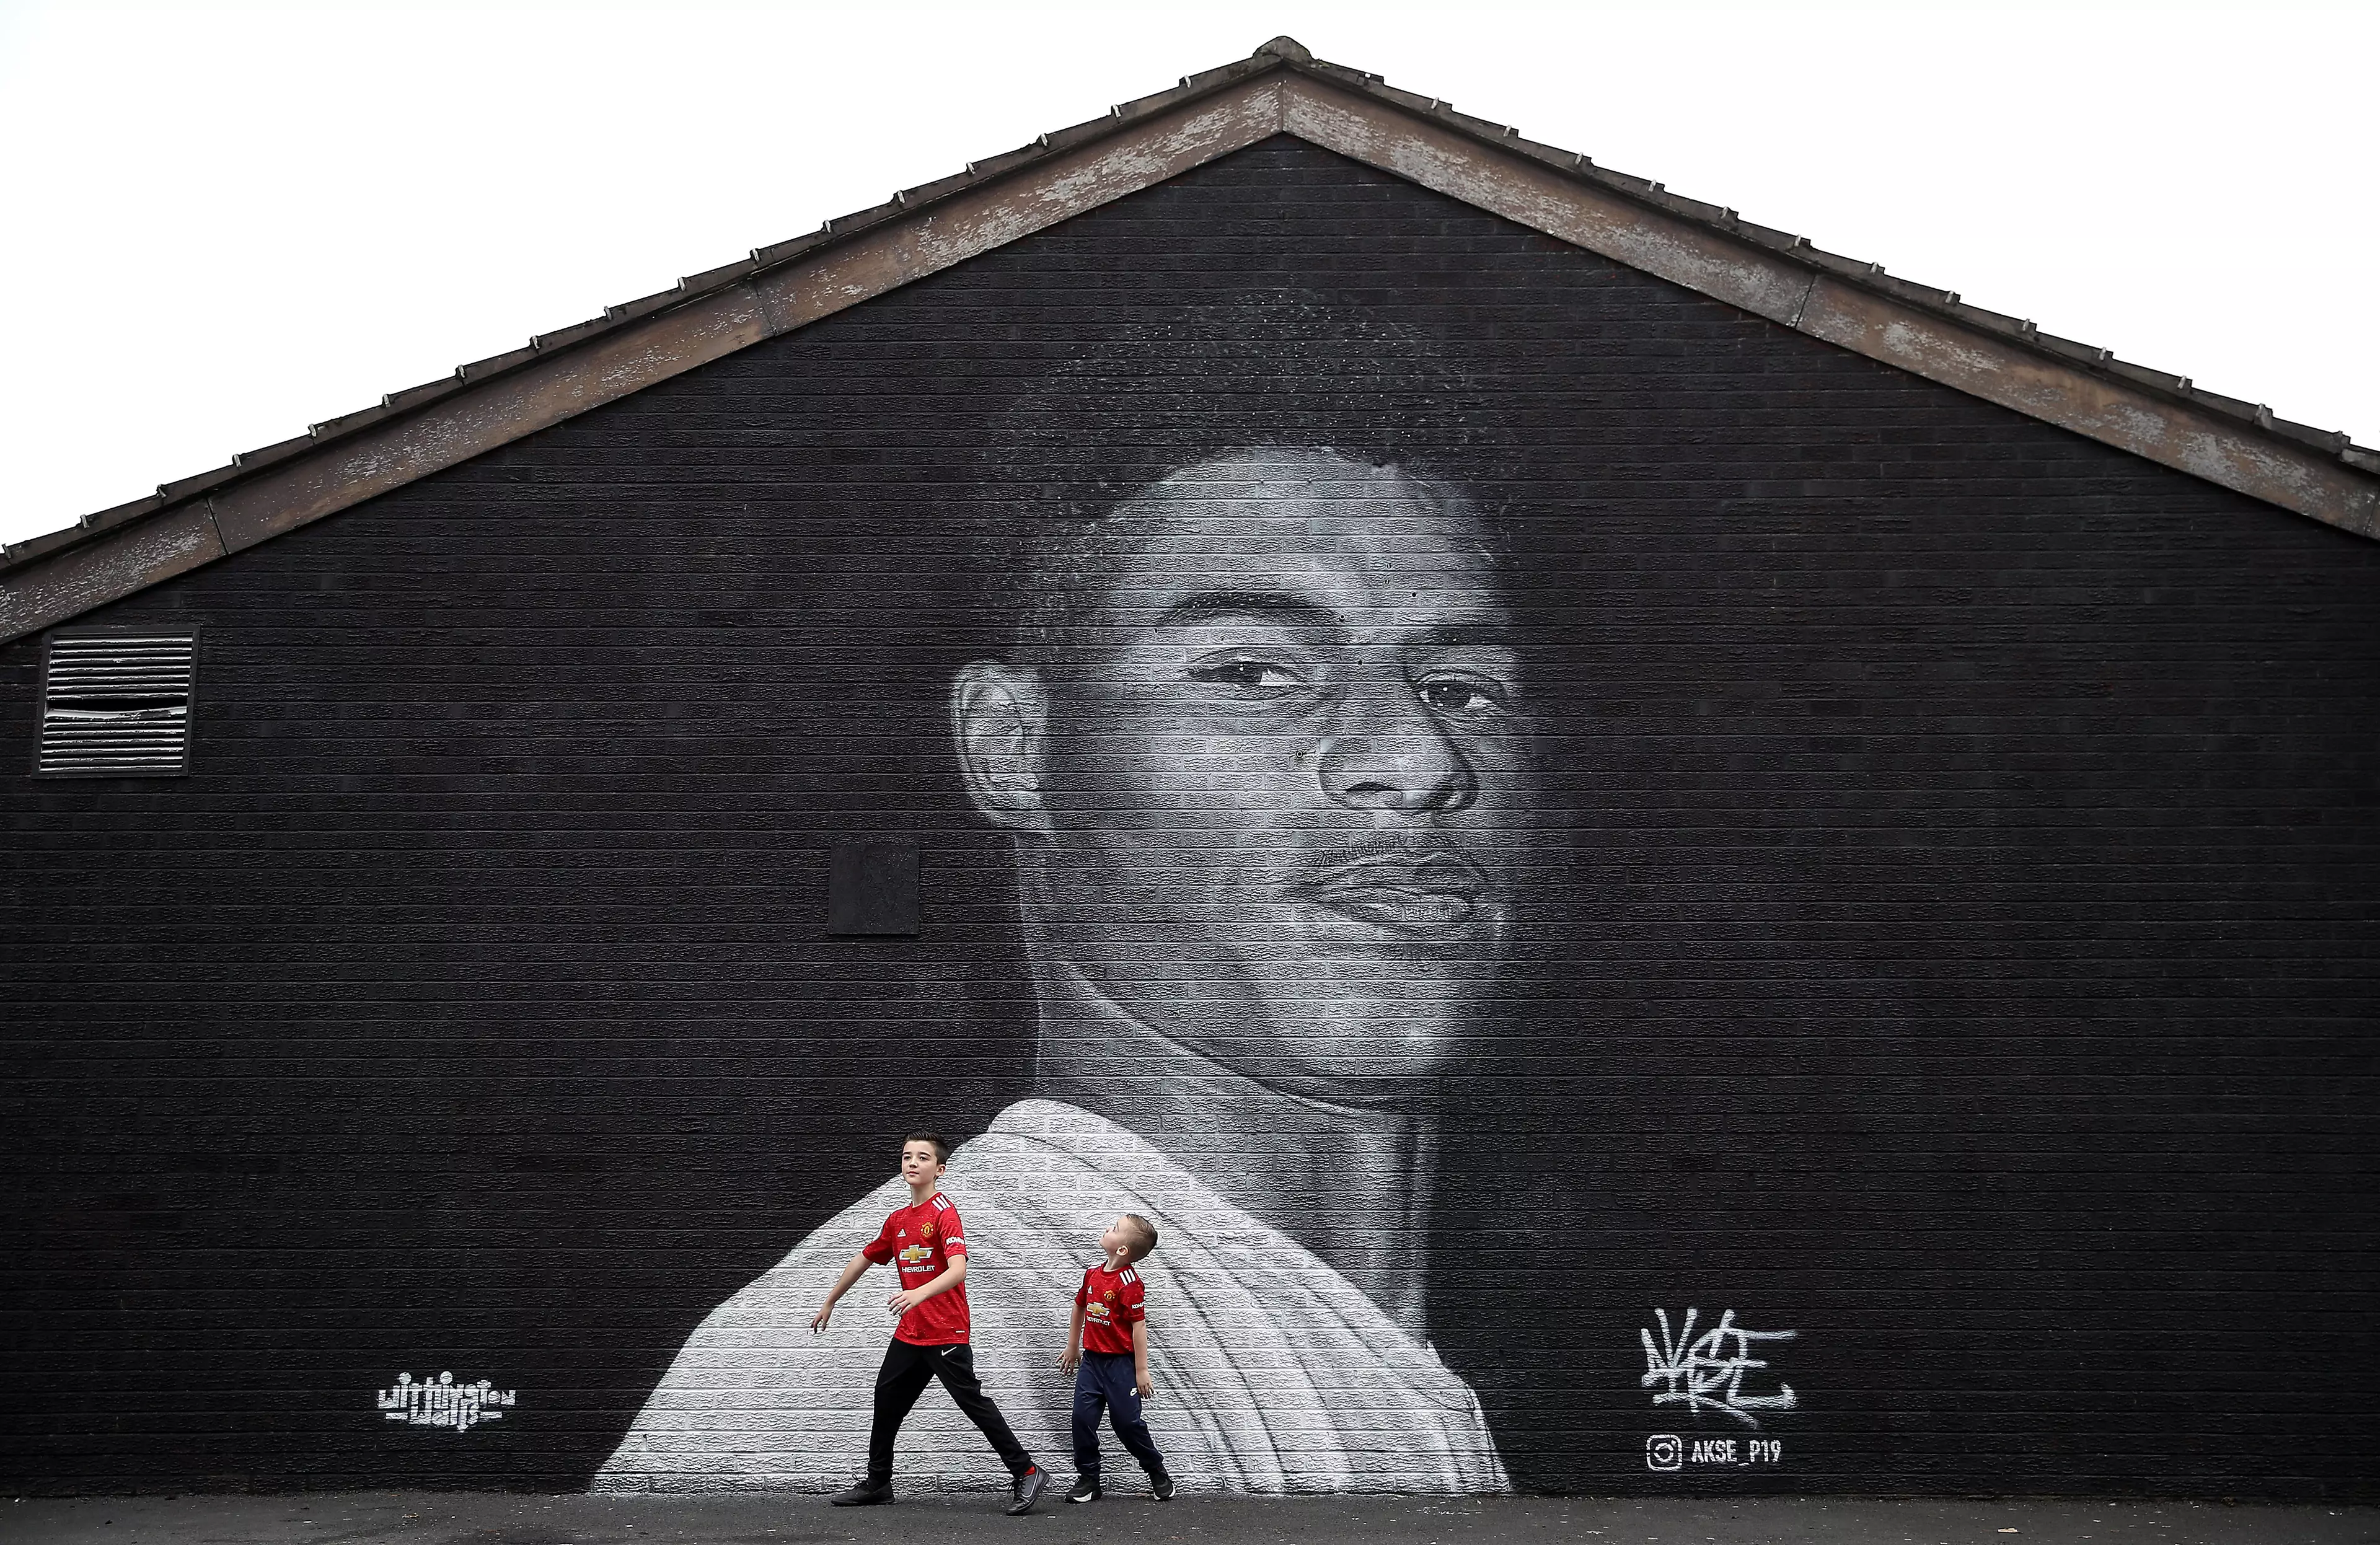 Young Manchester United fans have their picture taken in front of the mural. Image: PA Images